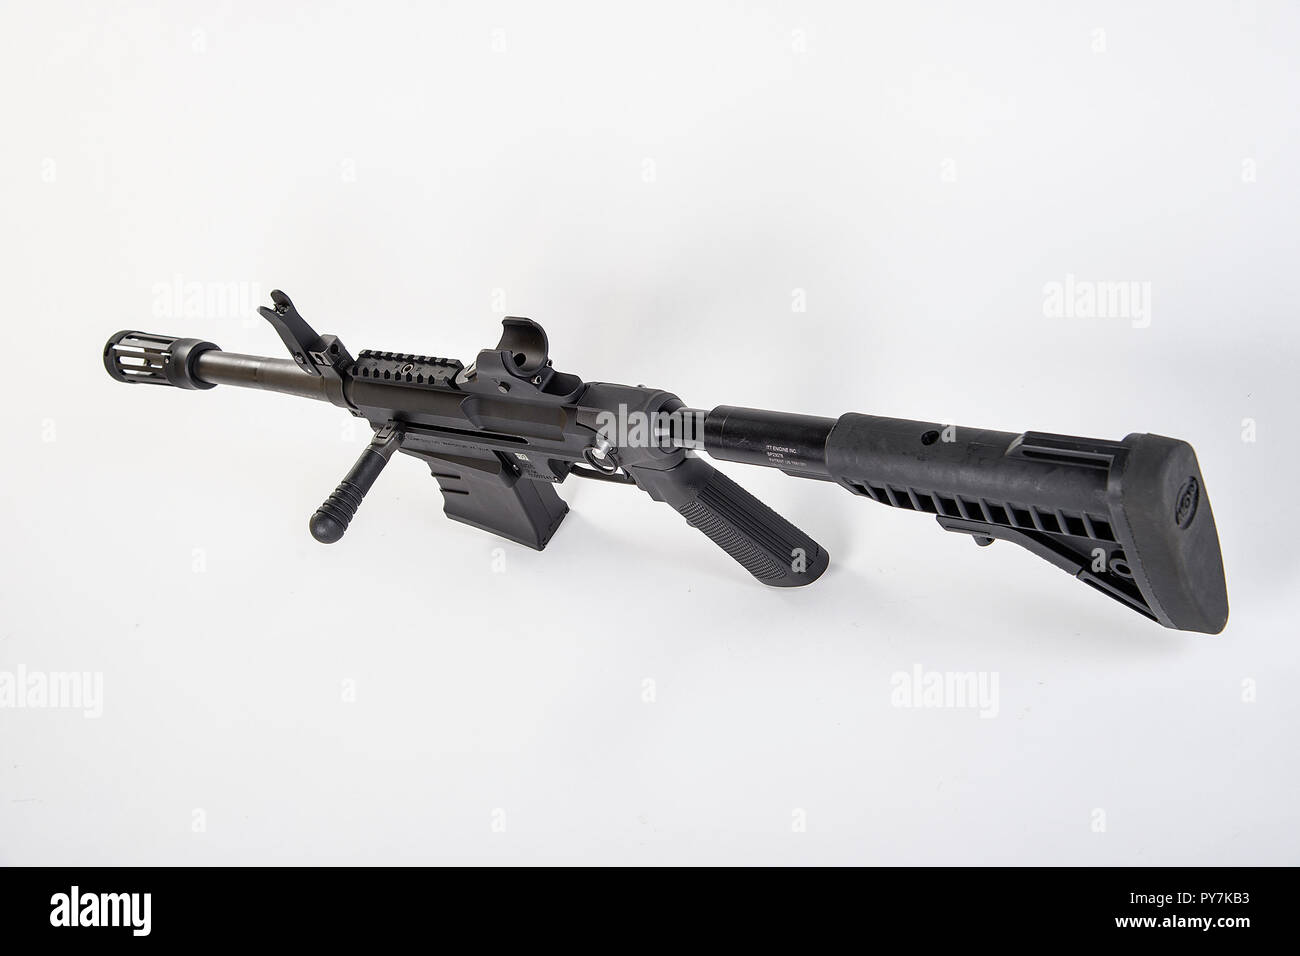 The M26 Modular Accessory Shotgun System (MASS) is a developmental under-barrel shotgun attachment for the M16/M4 family of United States military firearms. It can also be fitted with a pistol grip and collapsible stock to act as a stand-alone weapon. Stock Photo